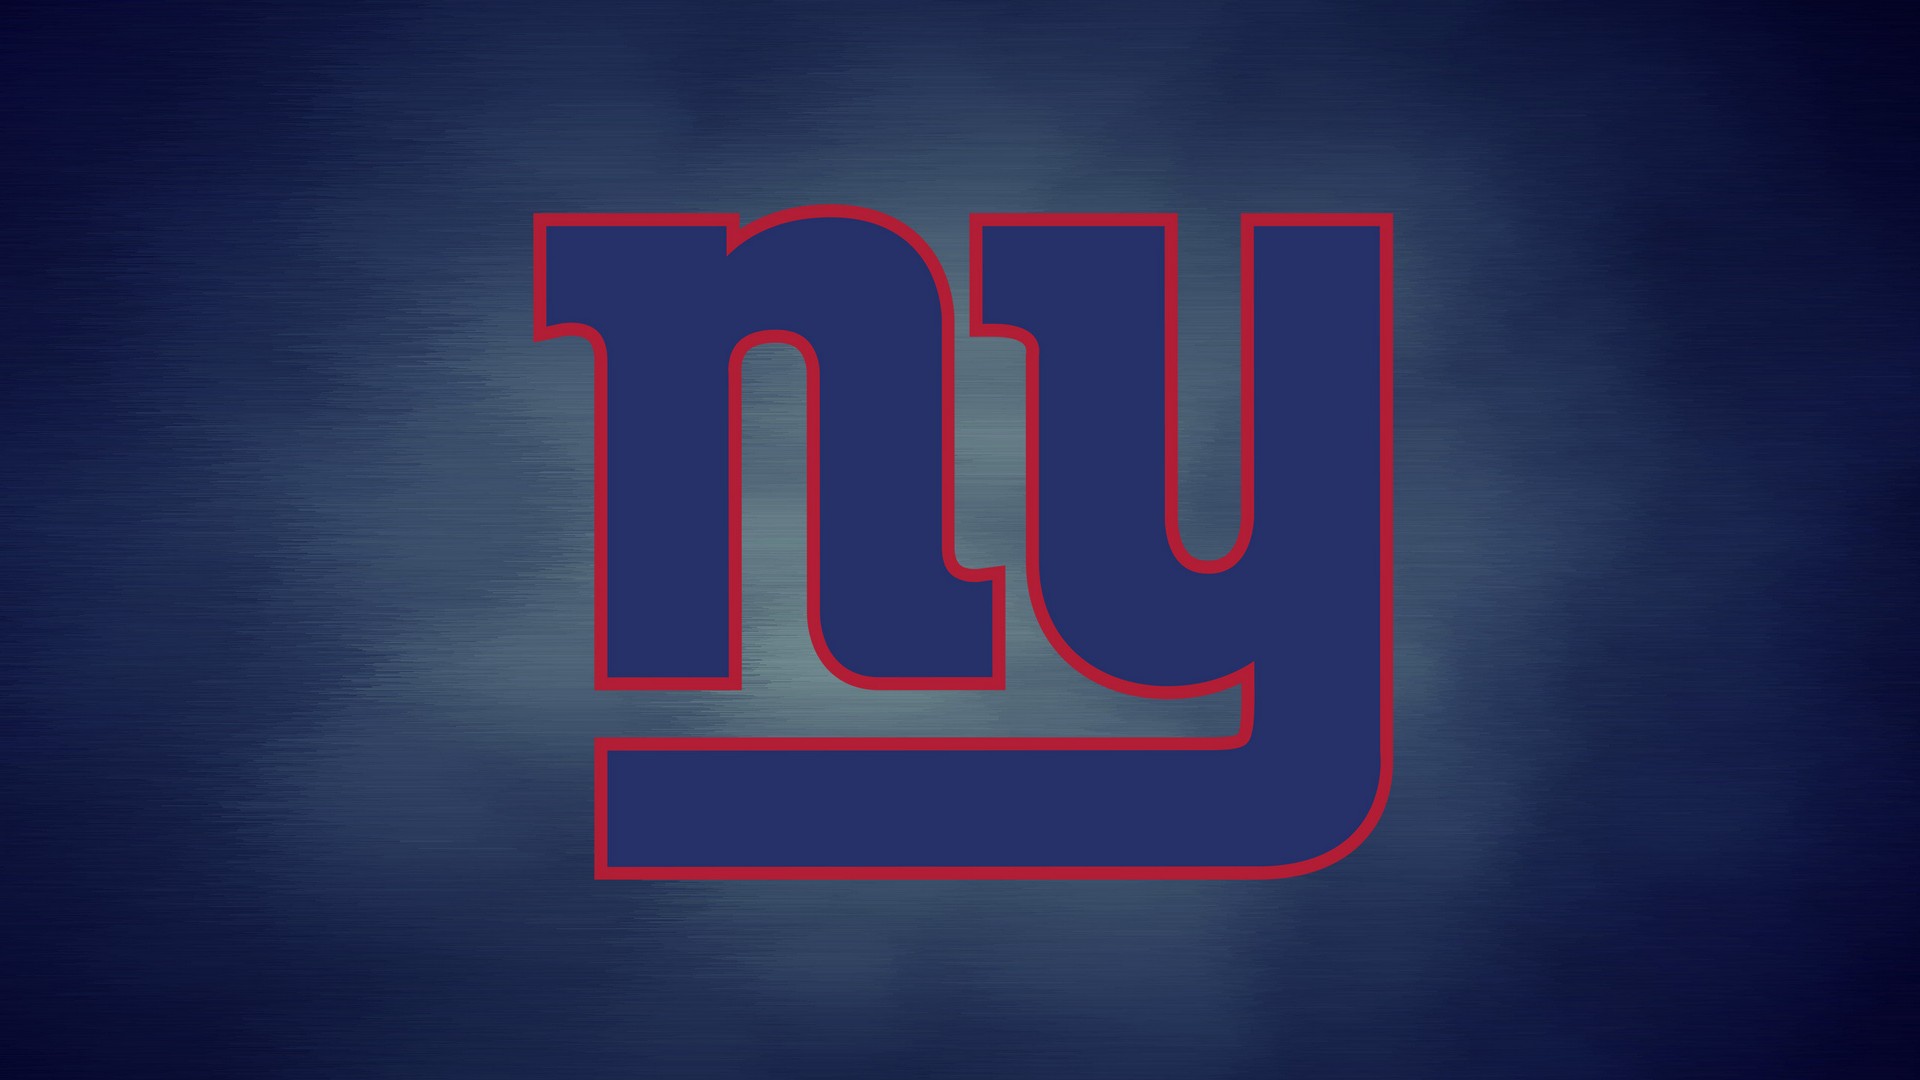 New York Giants NFL Wallpaper HD with high-resolution 1920x1080 pixel. You can use this wallpaper for your Mac or Windows Desktop Background, iPhone, Android or Tablet and another Smartphone device